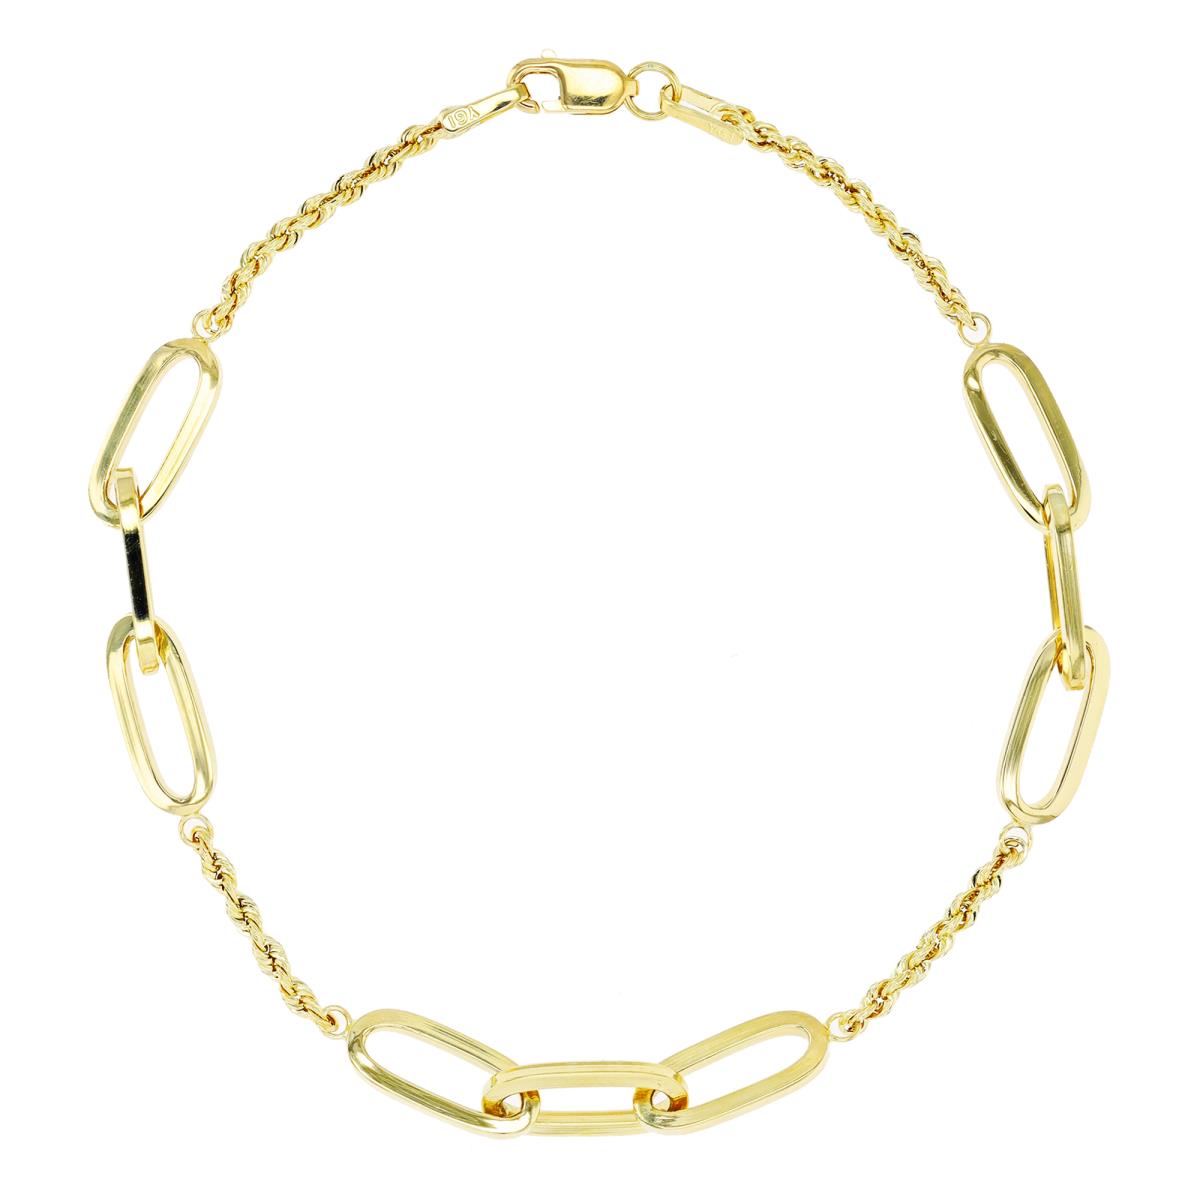 10K Yellow Gold 2.50mm-5.00mm Rope and Paper Clip 6.5" Chain Bracelet